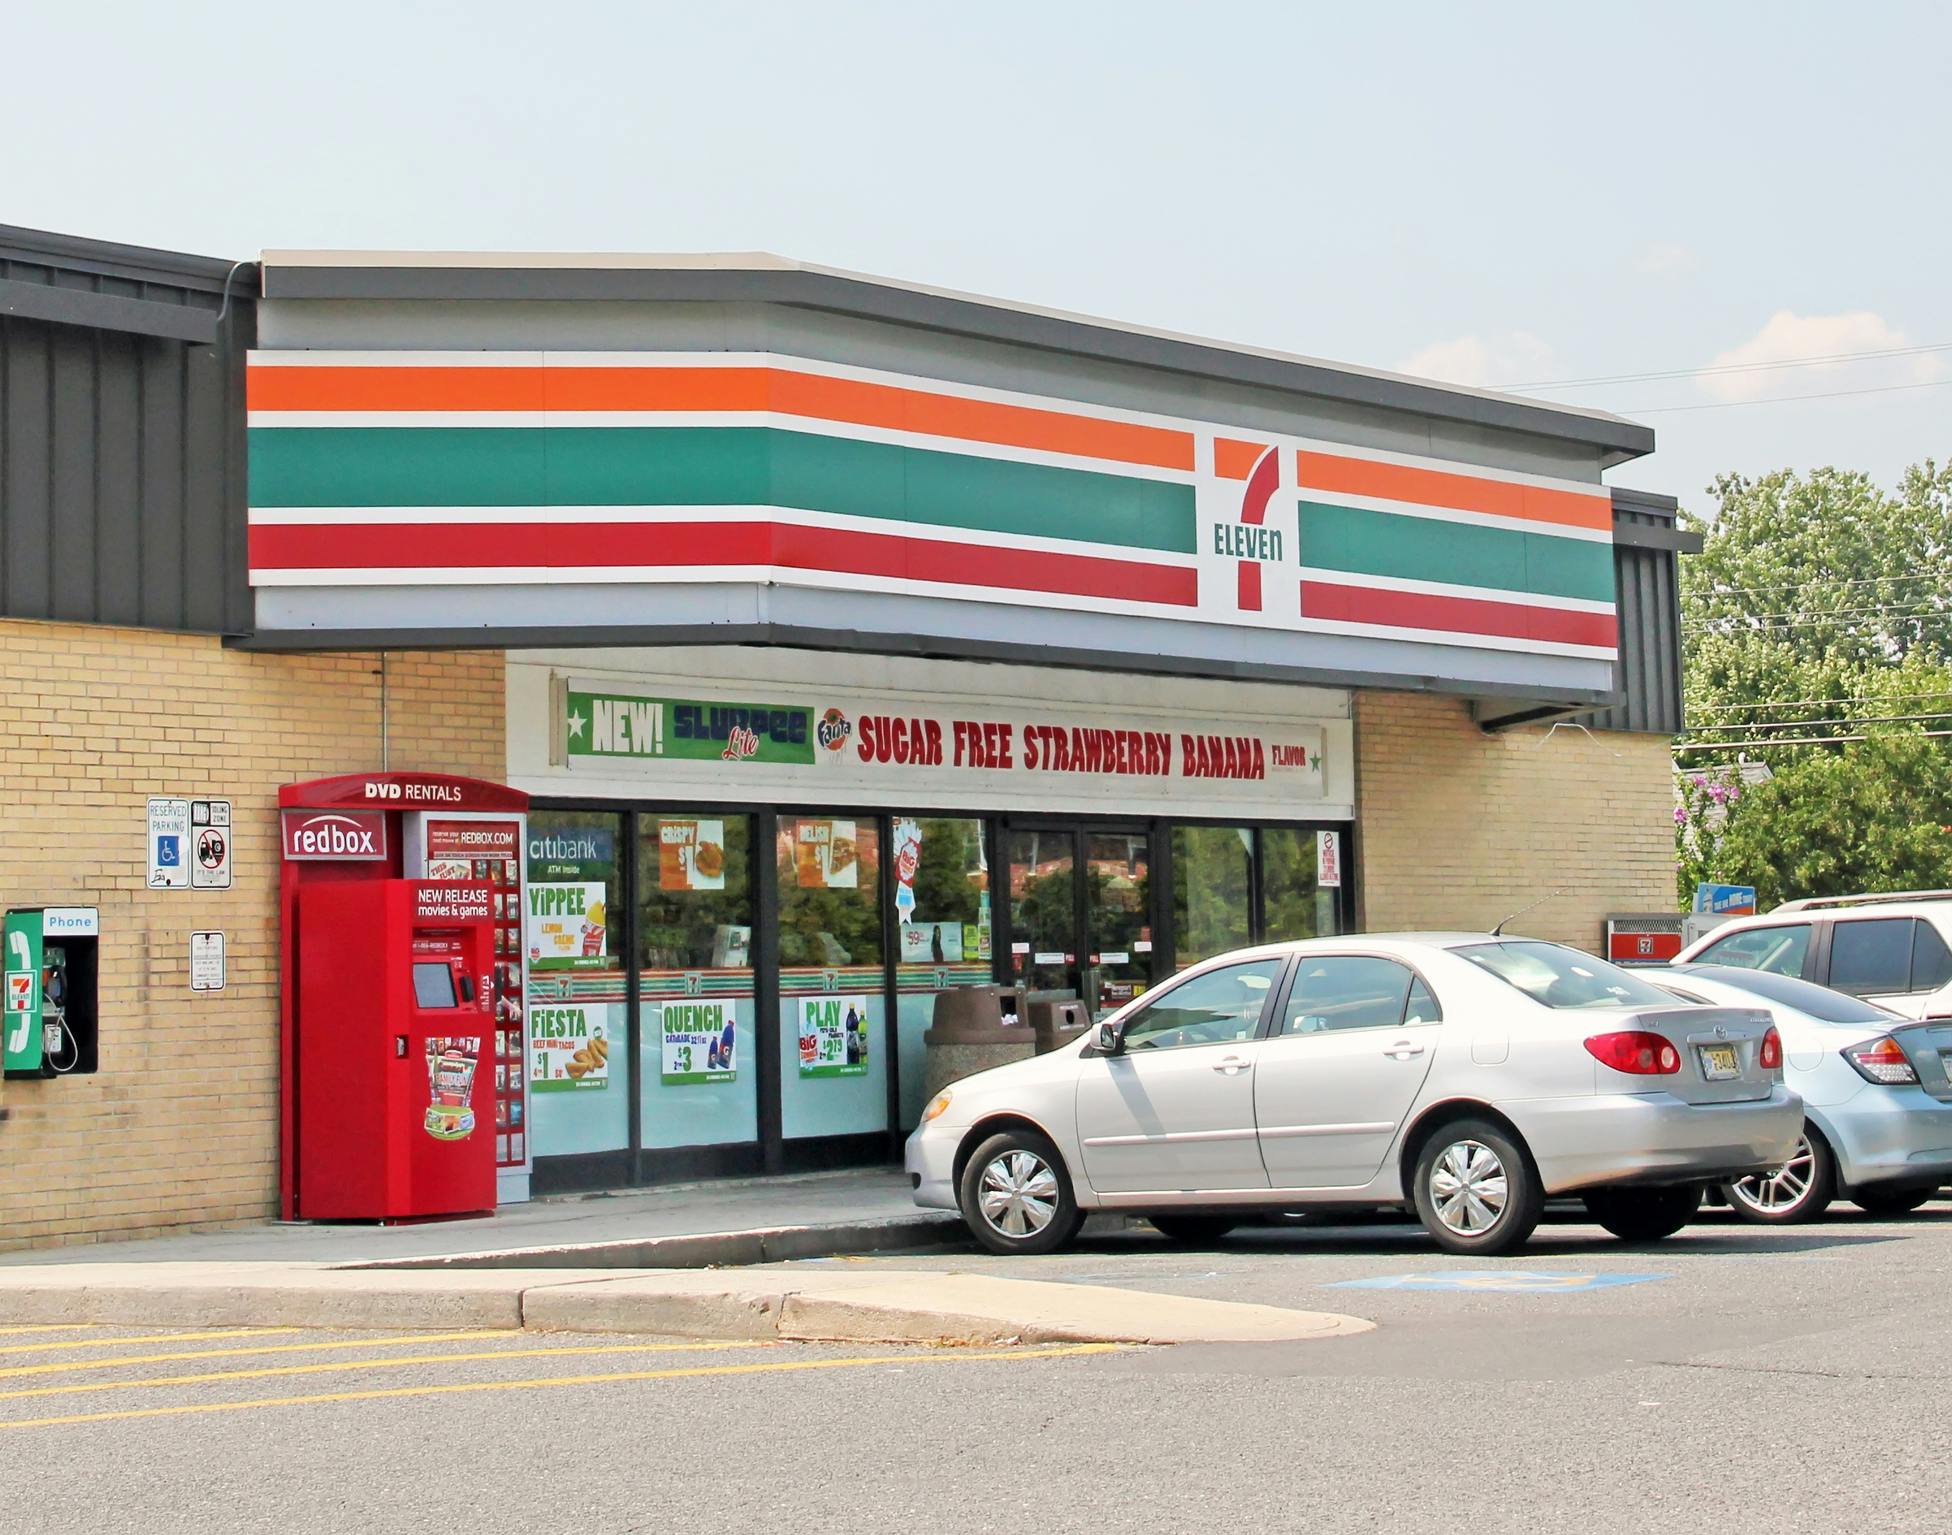 - A 7-eleven storefront with cars parked in front of it.